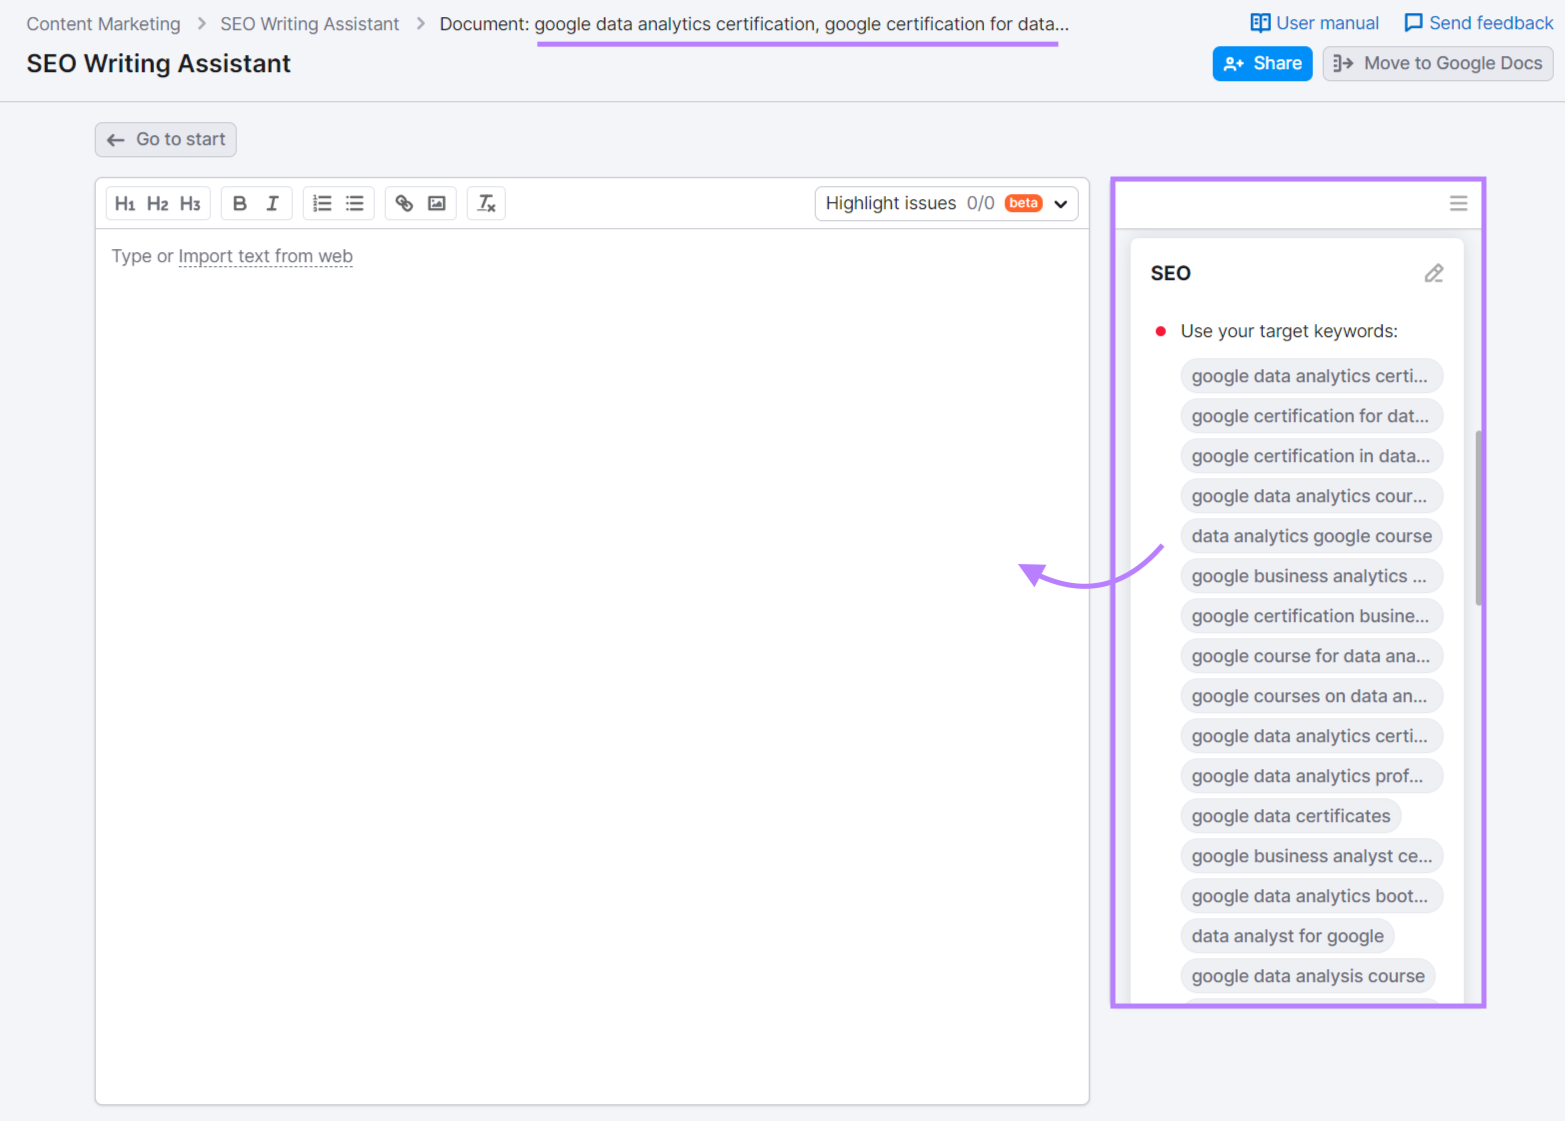 text editor in Semrush’s SEO Writing Assistant